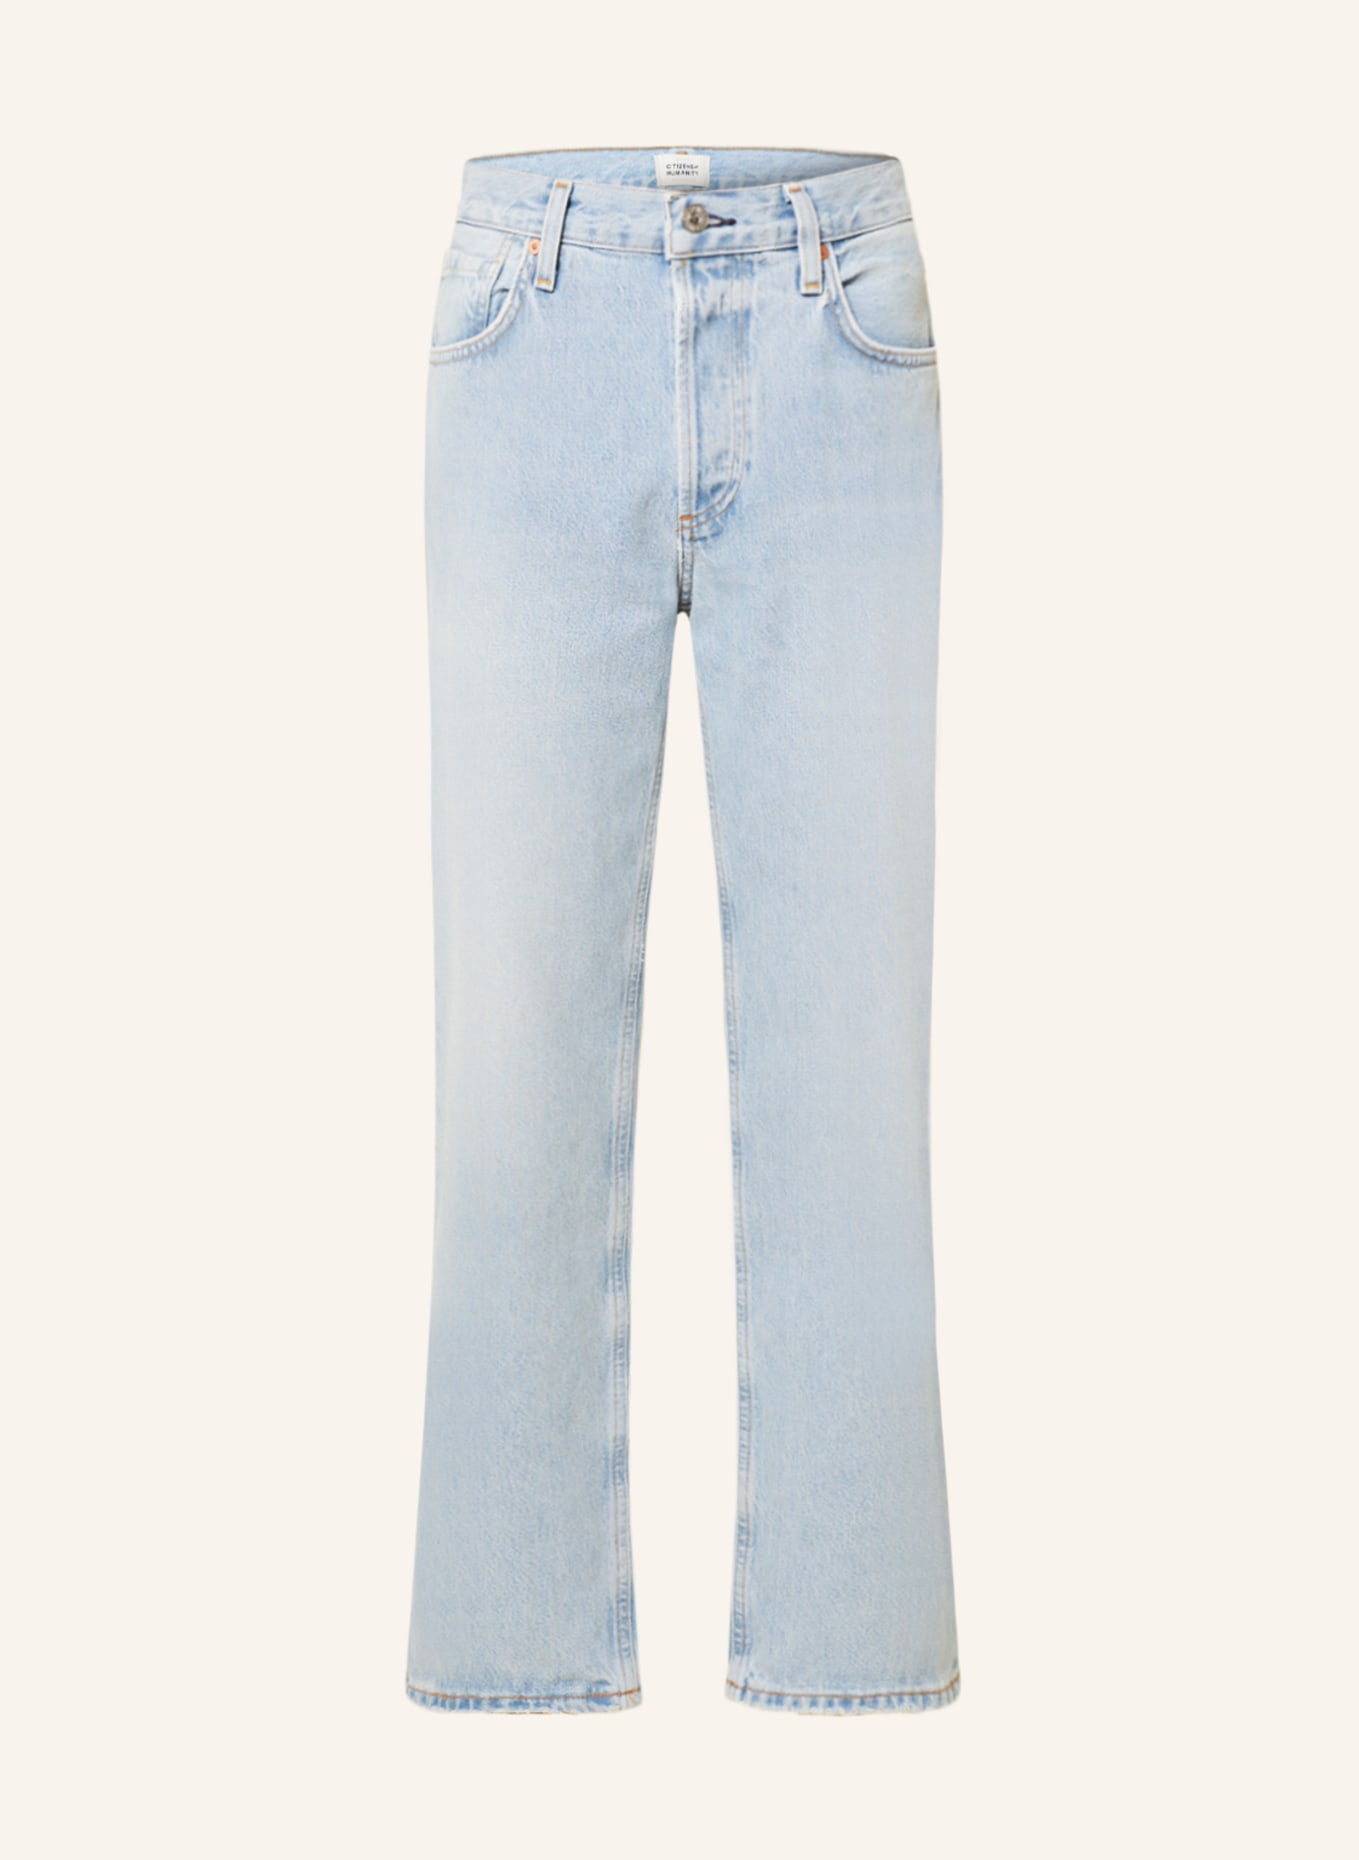 CITIZENS of HUMANITY Straight Jeans, Farbe: scout lt vint ind w/damage (Bild 1)